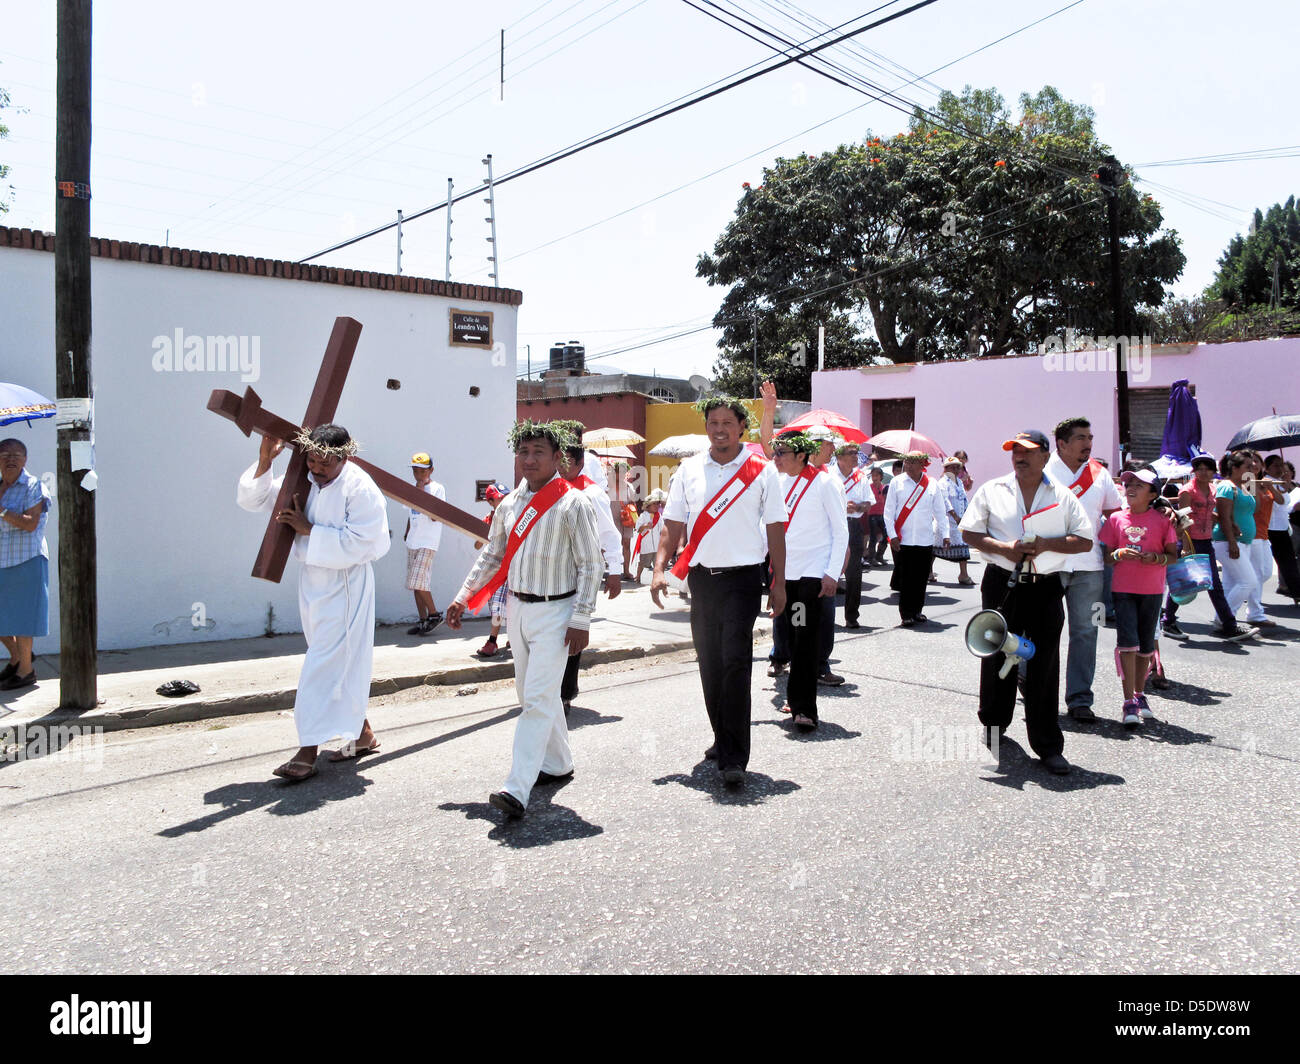 Oaxaca, Mexico. 29th March, 2013. Apostles wearing crowns of thorns & parishioners follow Jesus carrying cross along local streets in re-enactment of the Stations of the Cross on Good Friday, March 29, 2013, Oaxaca Mexico Credit: Dorothy Alexander/Alamy Live News Stock Photo